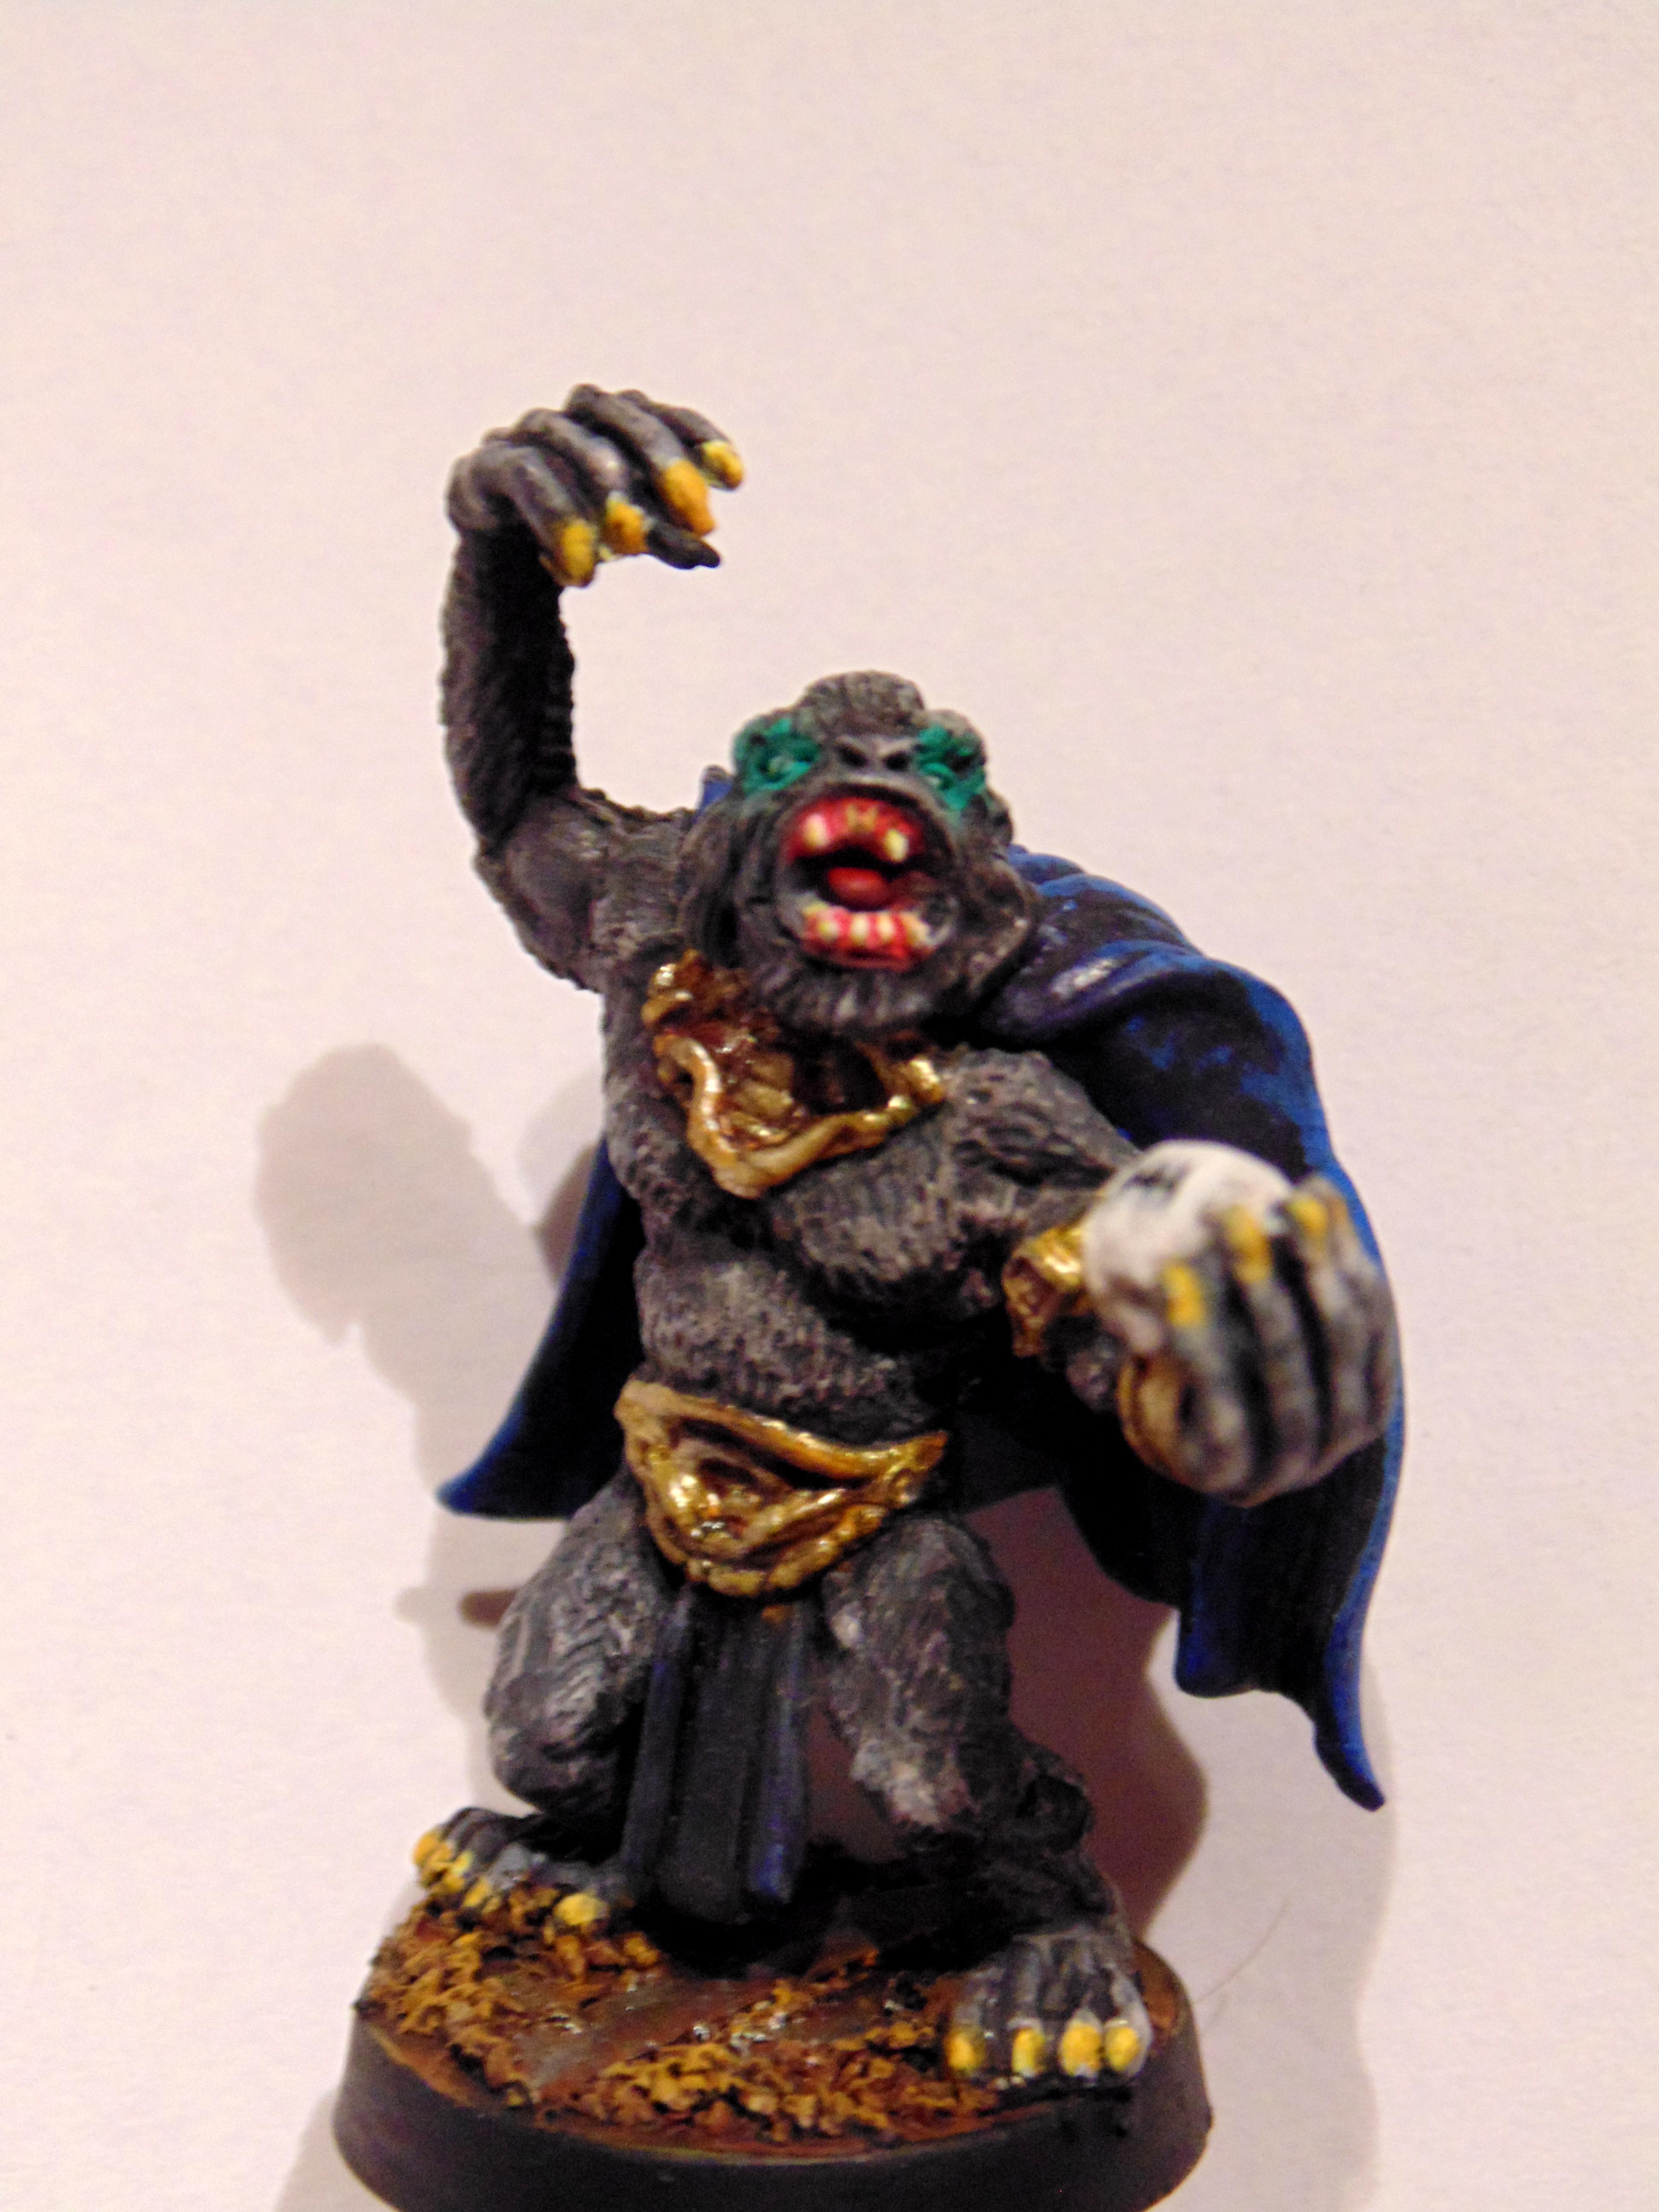 Ape, Conversion, Dead, Goblins, Lord Of The Rings, Magical, Night, Nightgoblins, Repainted, Troll